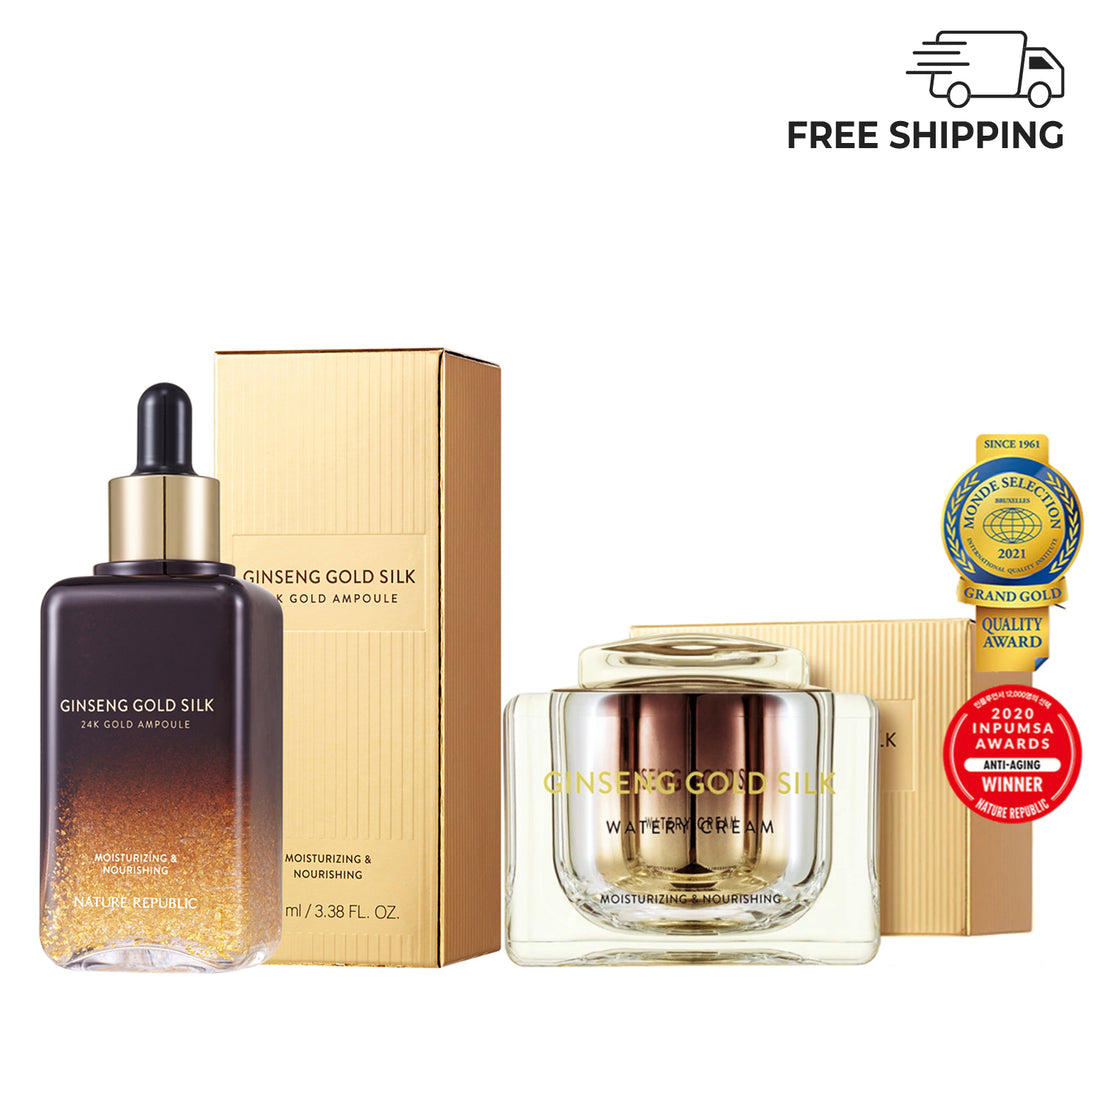 [THE BEGINNING OF A GOLDEN MIRACLE] Ginseng Gold Silk Duo - 24K Gold Ampoule & Watery Cream